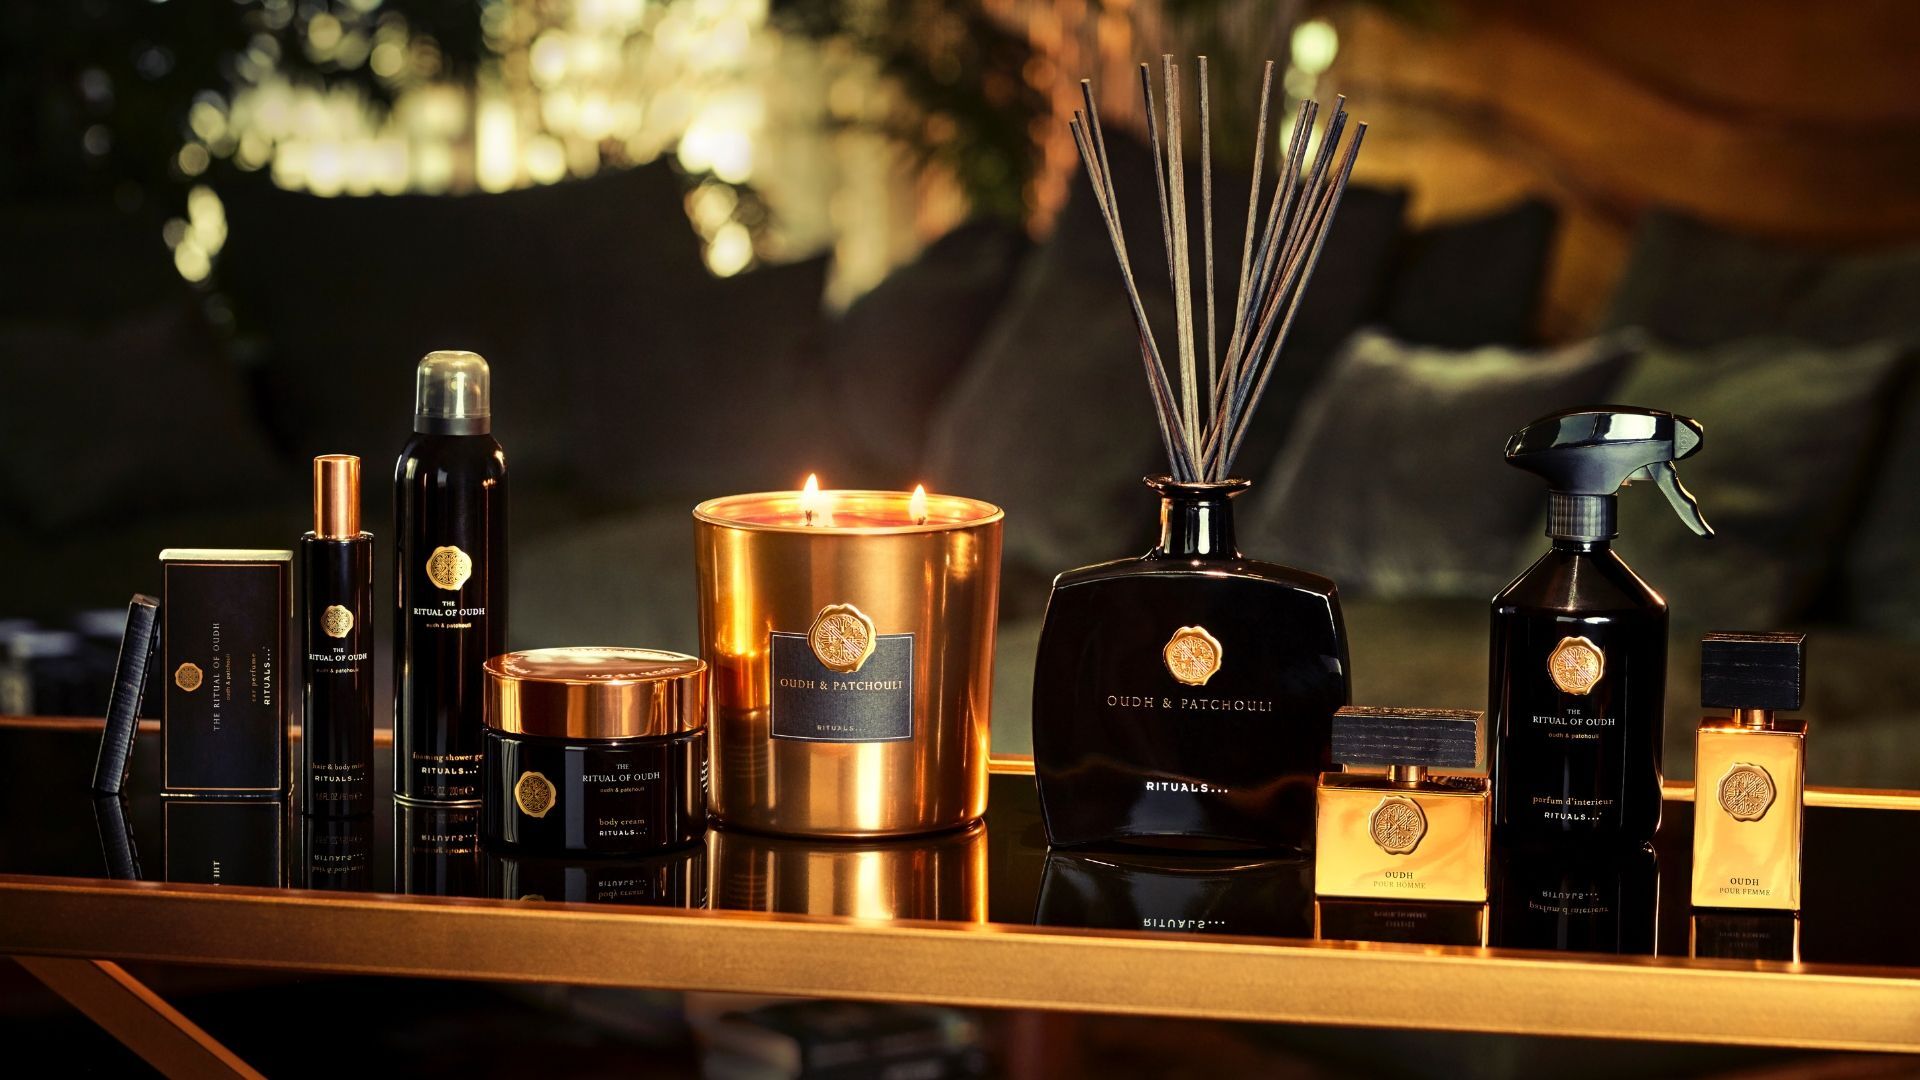 The Ritual Of Oudh Celebrates The Scents Of The Middle East